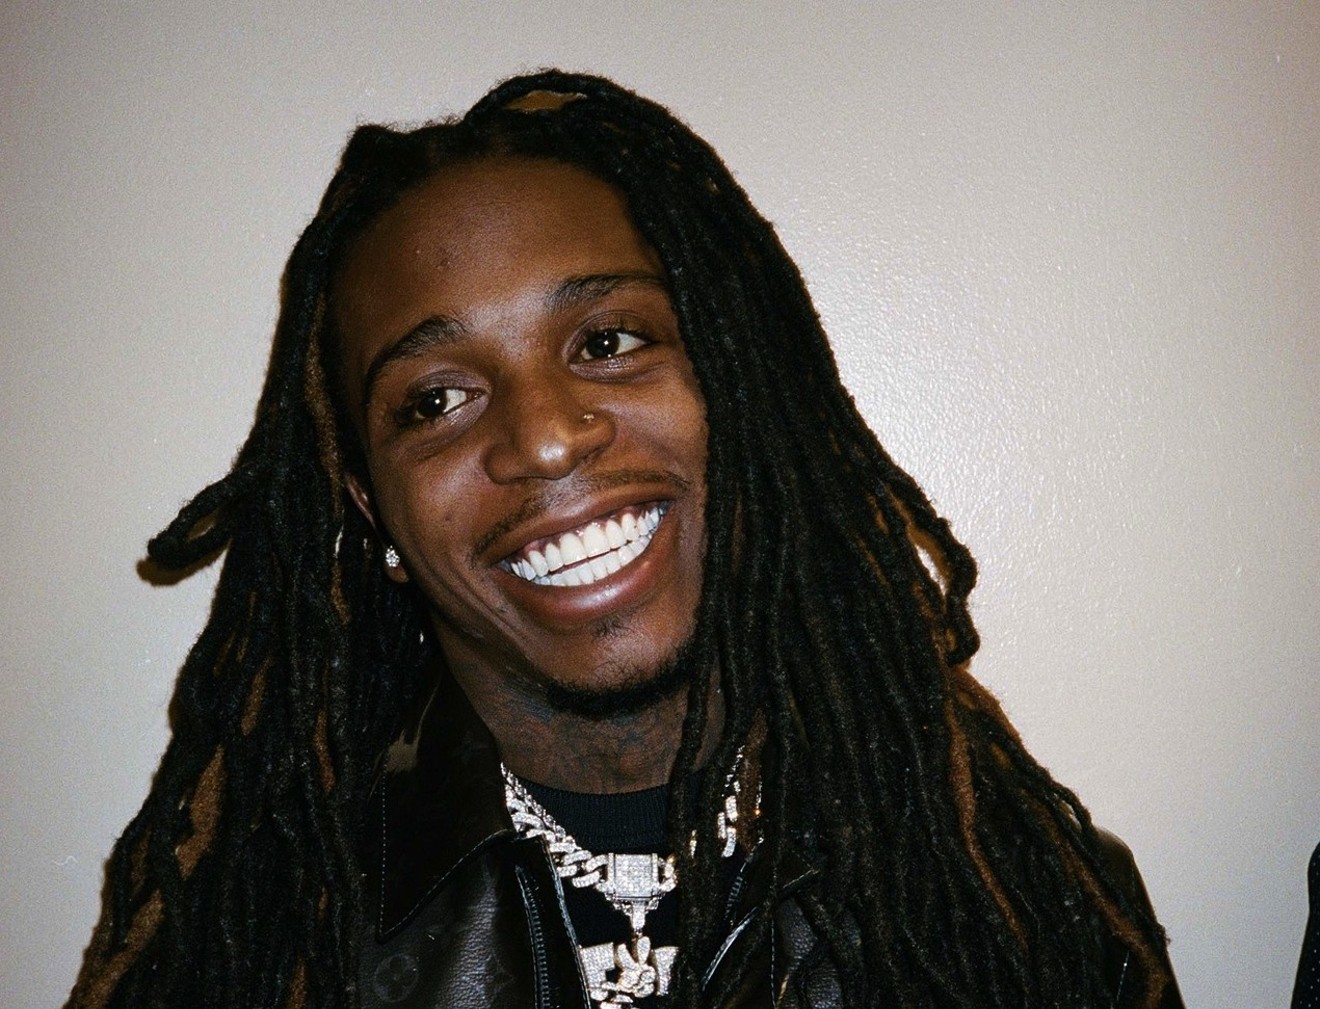 Jacquees smiles at his haters.